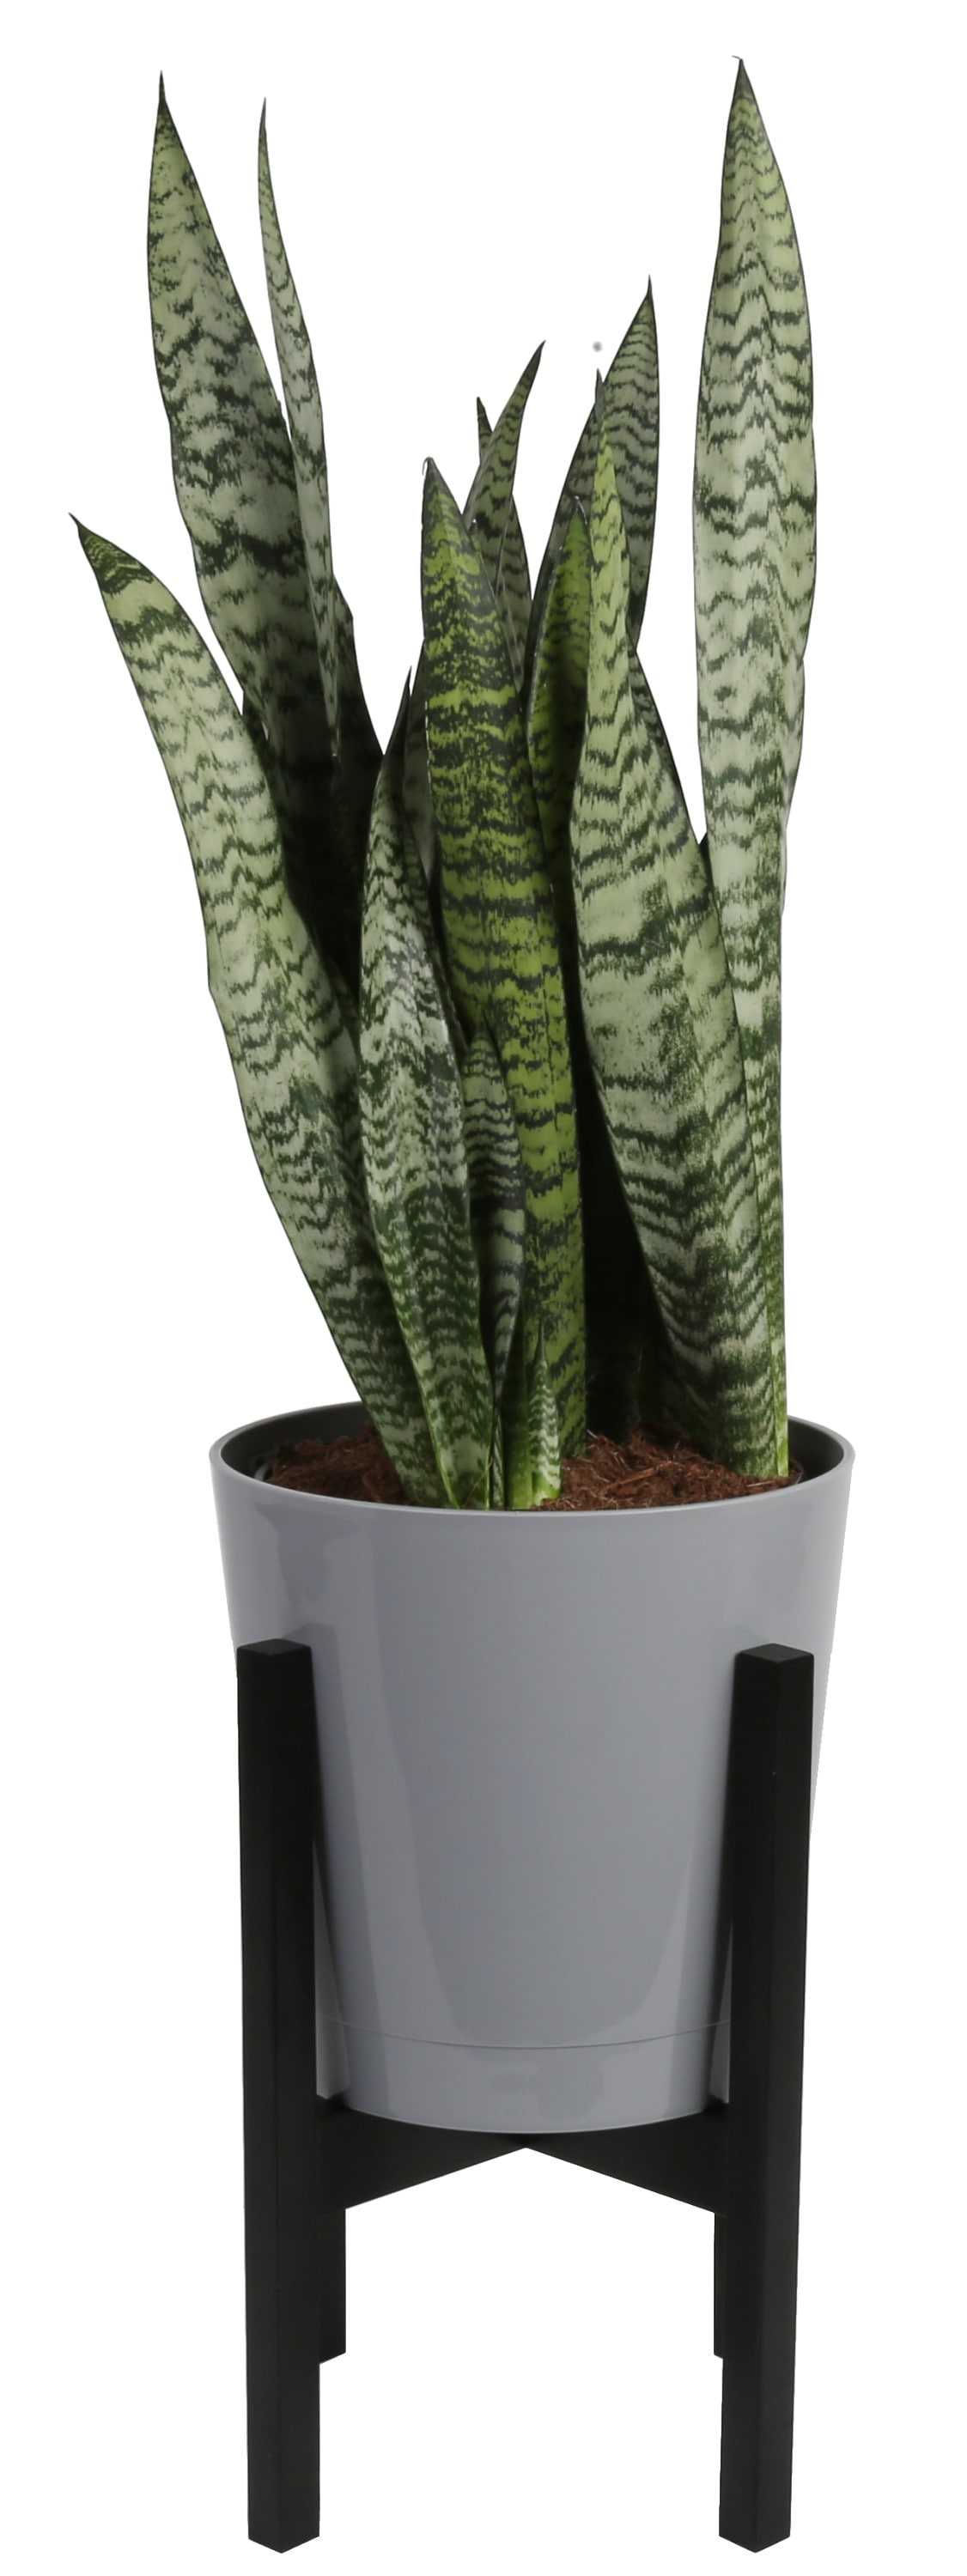 Costa Farms Snake Plant House Plant in 10-in Planter | L-SAN-S-GMC-01-LW